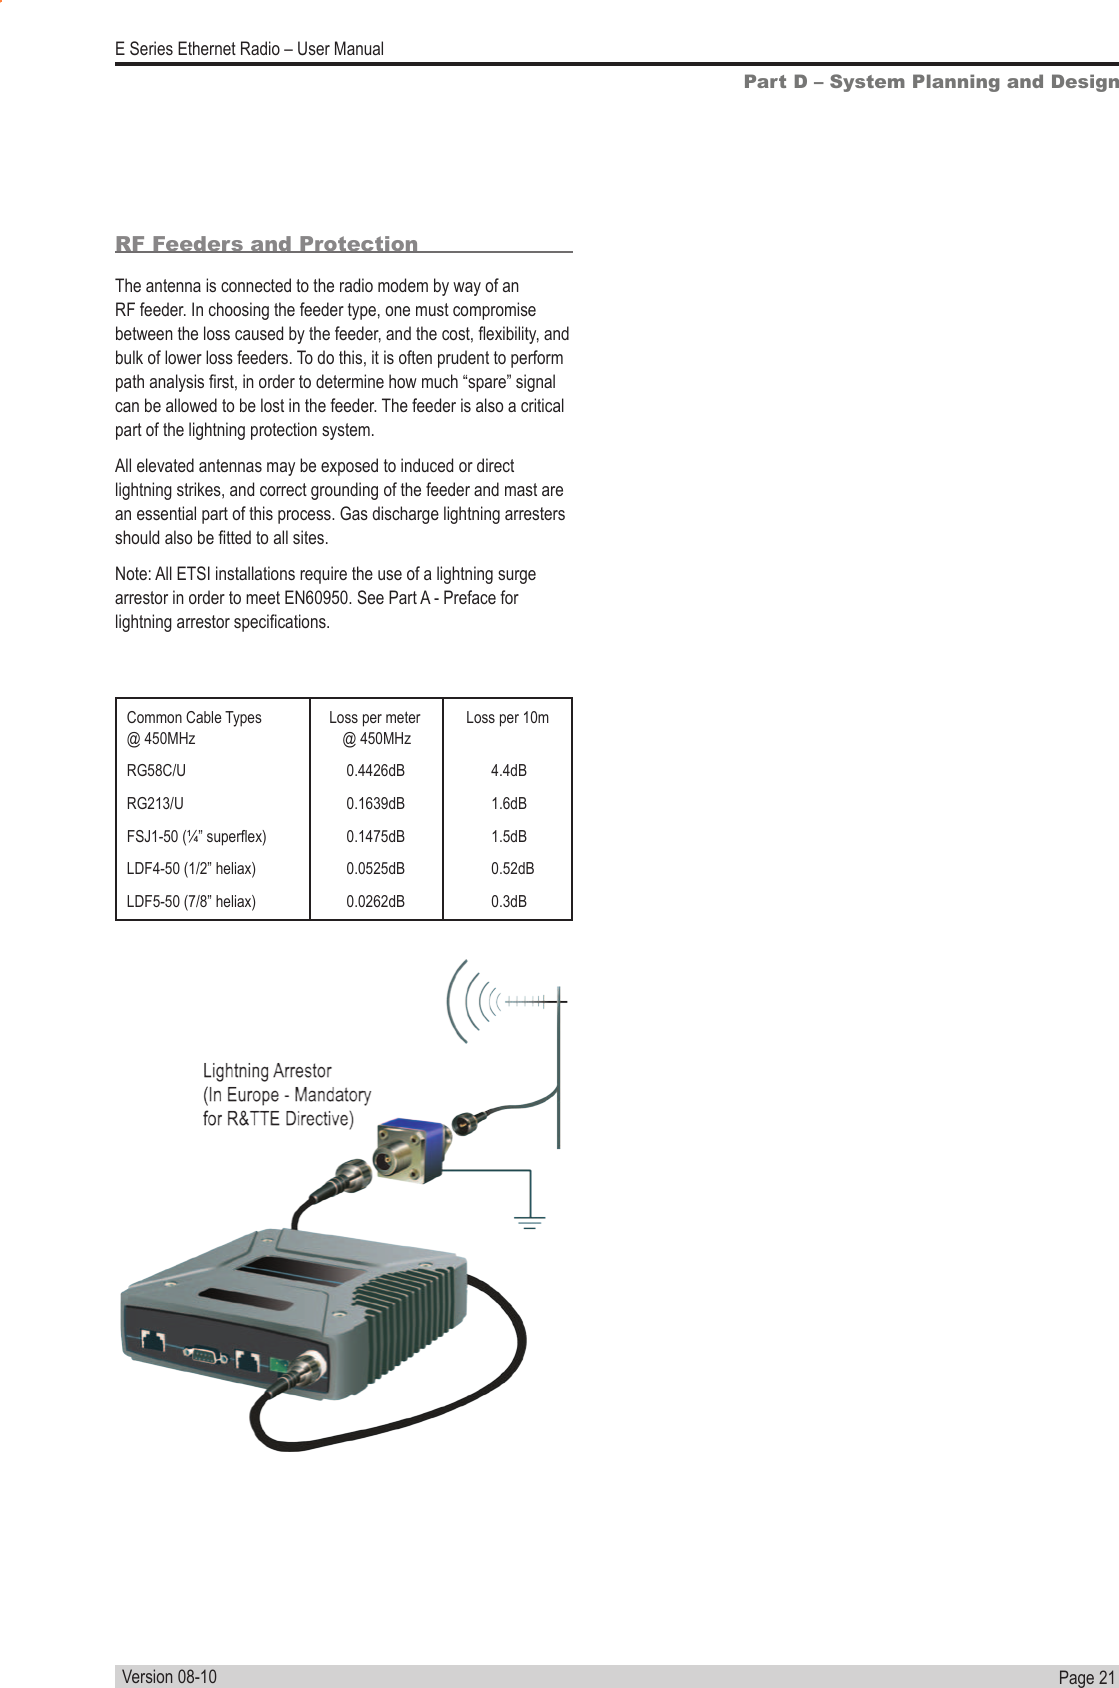 Page  21  E Series Ethernet Radio – User ManualVersion 08-10Part D – System Planning and DesignCommon Cable Types  Loss per meter  Loss per 10m  @ 450MHz   @ 450MHzRG58C/U  0.4426dB 4.4dBRG213/U  0.1639dB 1.6dBFSJ1-50 (¼” superex)  0.1475dB  1.5dBLDF4-50 (1/2” heliax)  0.0525dB  0.52dBLDF5-50 (7/8” heliax)  0.0262dB  0.3dBRF Feeders and ProtectionThe antenna is connected to the radio modem by way of an RF feeder. In choosing the feeder type, one must compromise between the loss caused by the feeder, and the cost, exibility, and bulk of lower loss feeders. To do this, it is often prudent to perform path analysis rst, in order to determine how much “spare” signal can be allowed to be lost in the feeder. The feeder is also a critical part of the lightning protection system.All elevated antennas may be exposed to induced or direct lightning strikes, and correct grounding of the feeder and mast are an essential part of this process. Gas discharge lightning arresters should also be tted to all sites.Note: All ETSI installations require the use of a lightning surge arrestor in order to meet EN60950. See Part A - Preface for lightning arrestor specications.